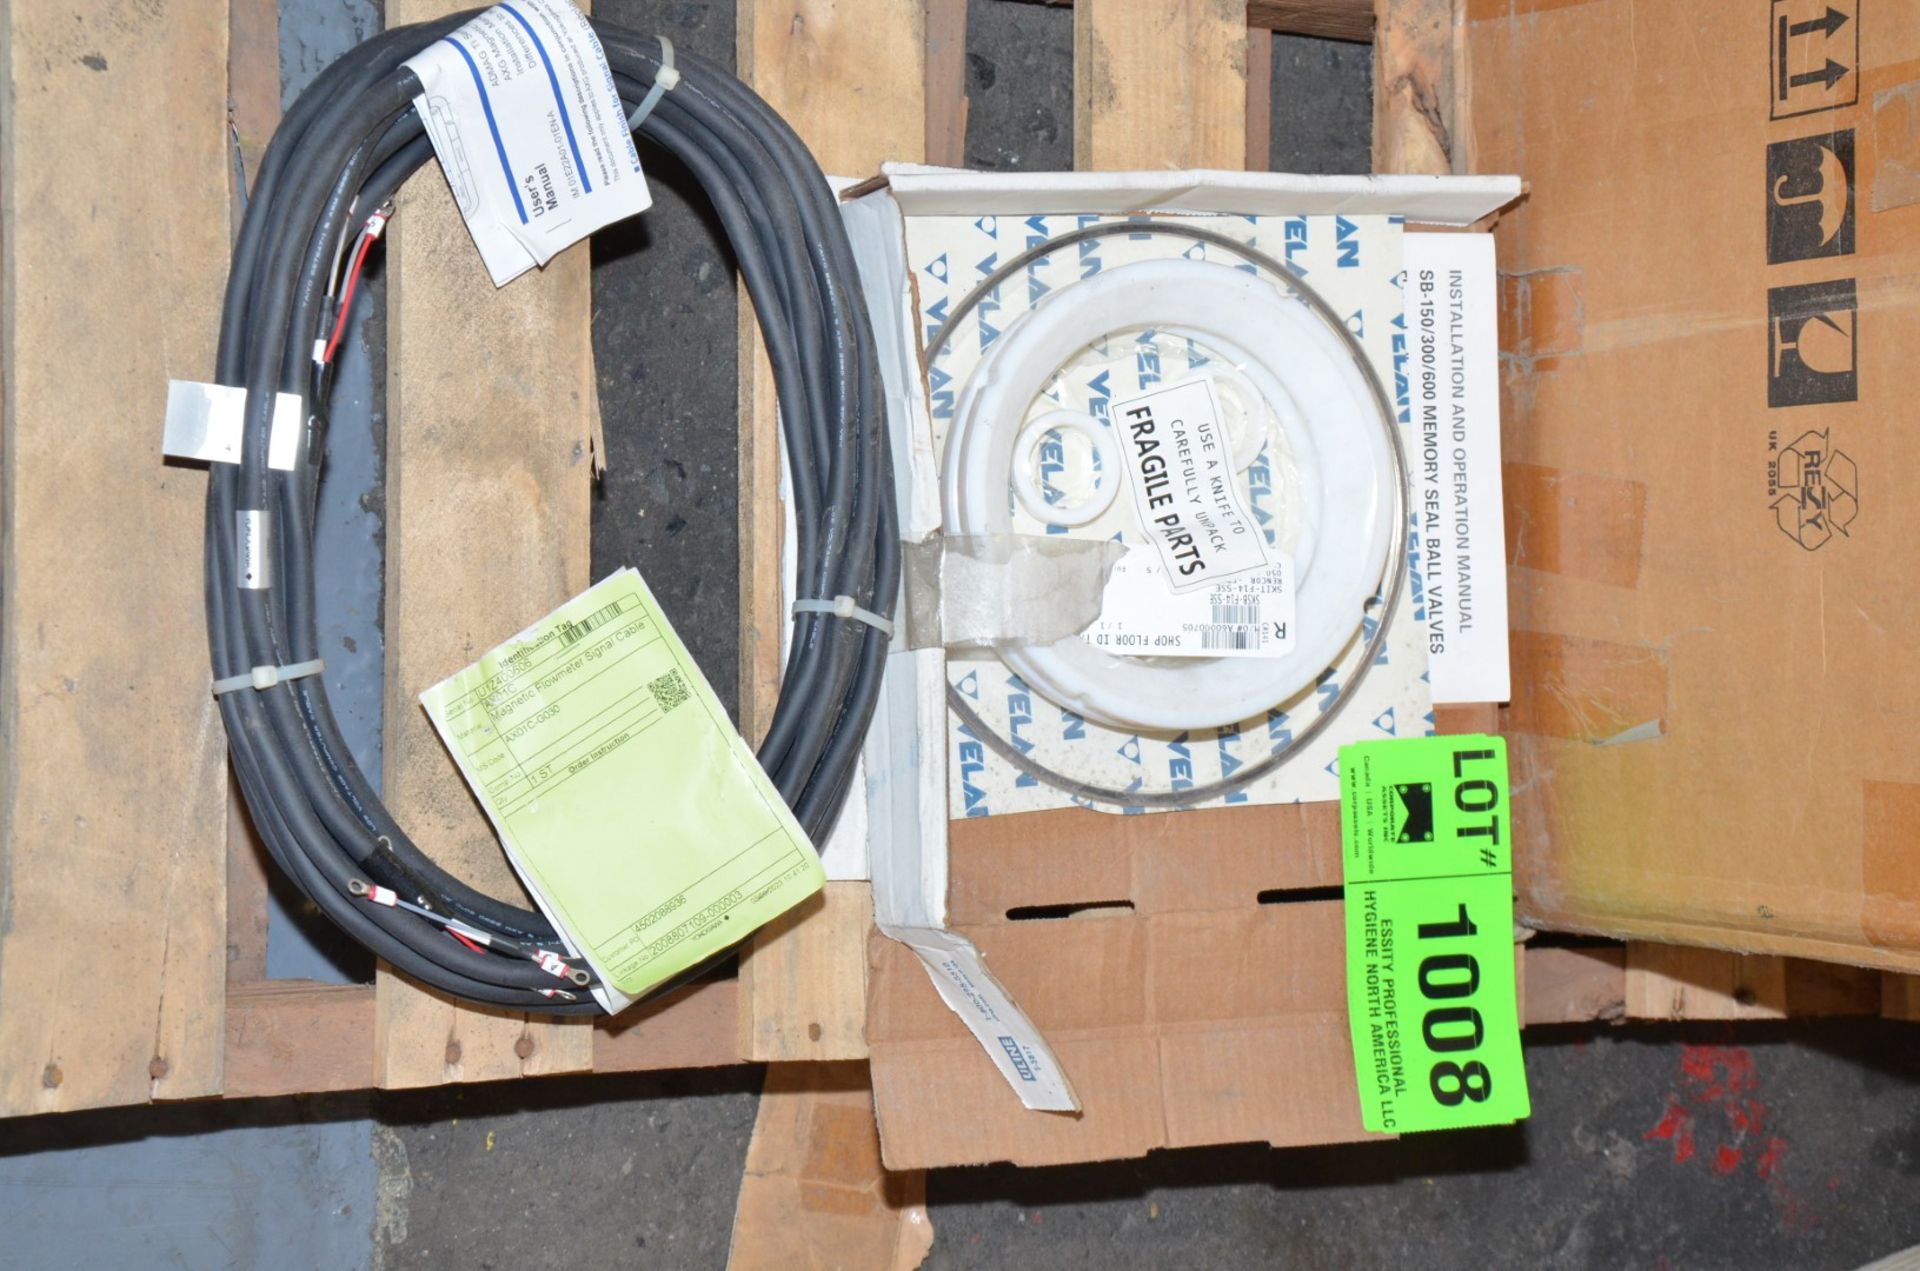 LOT/ FRAGILE PARTS [RIGGING FEE FOR LOT #1008 - $25 USD PLUS APPLICABLE TAXES]